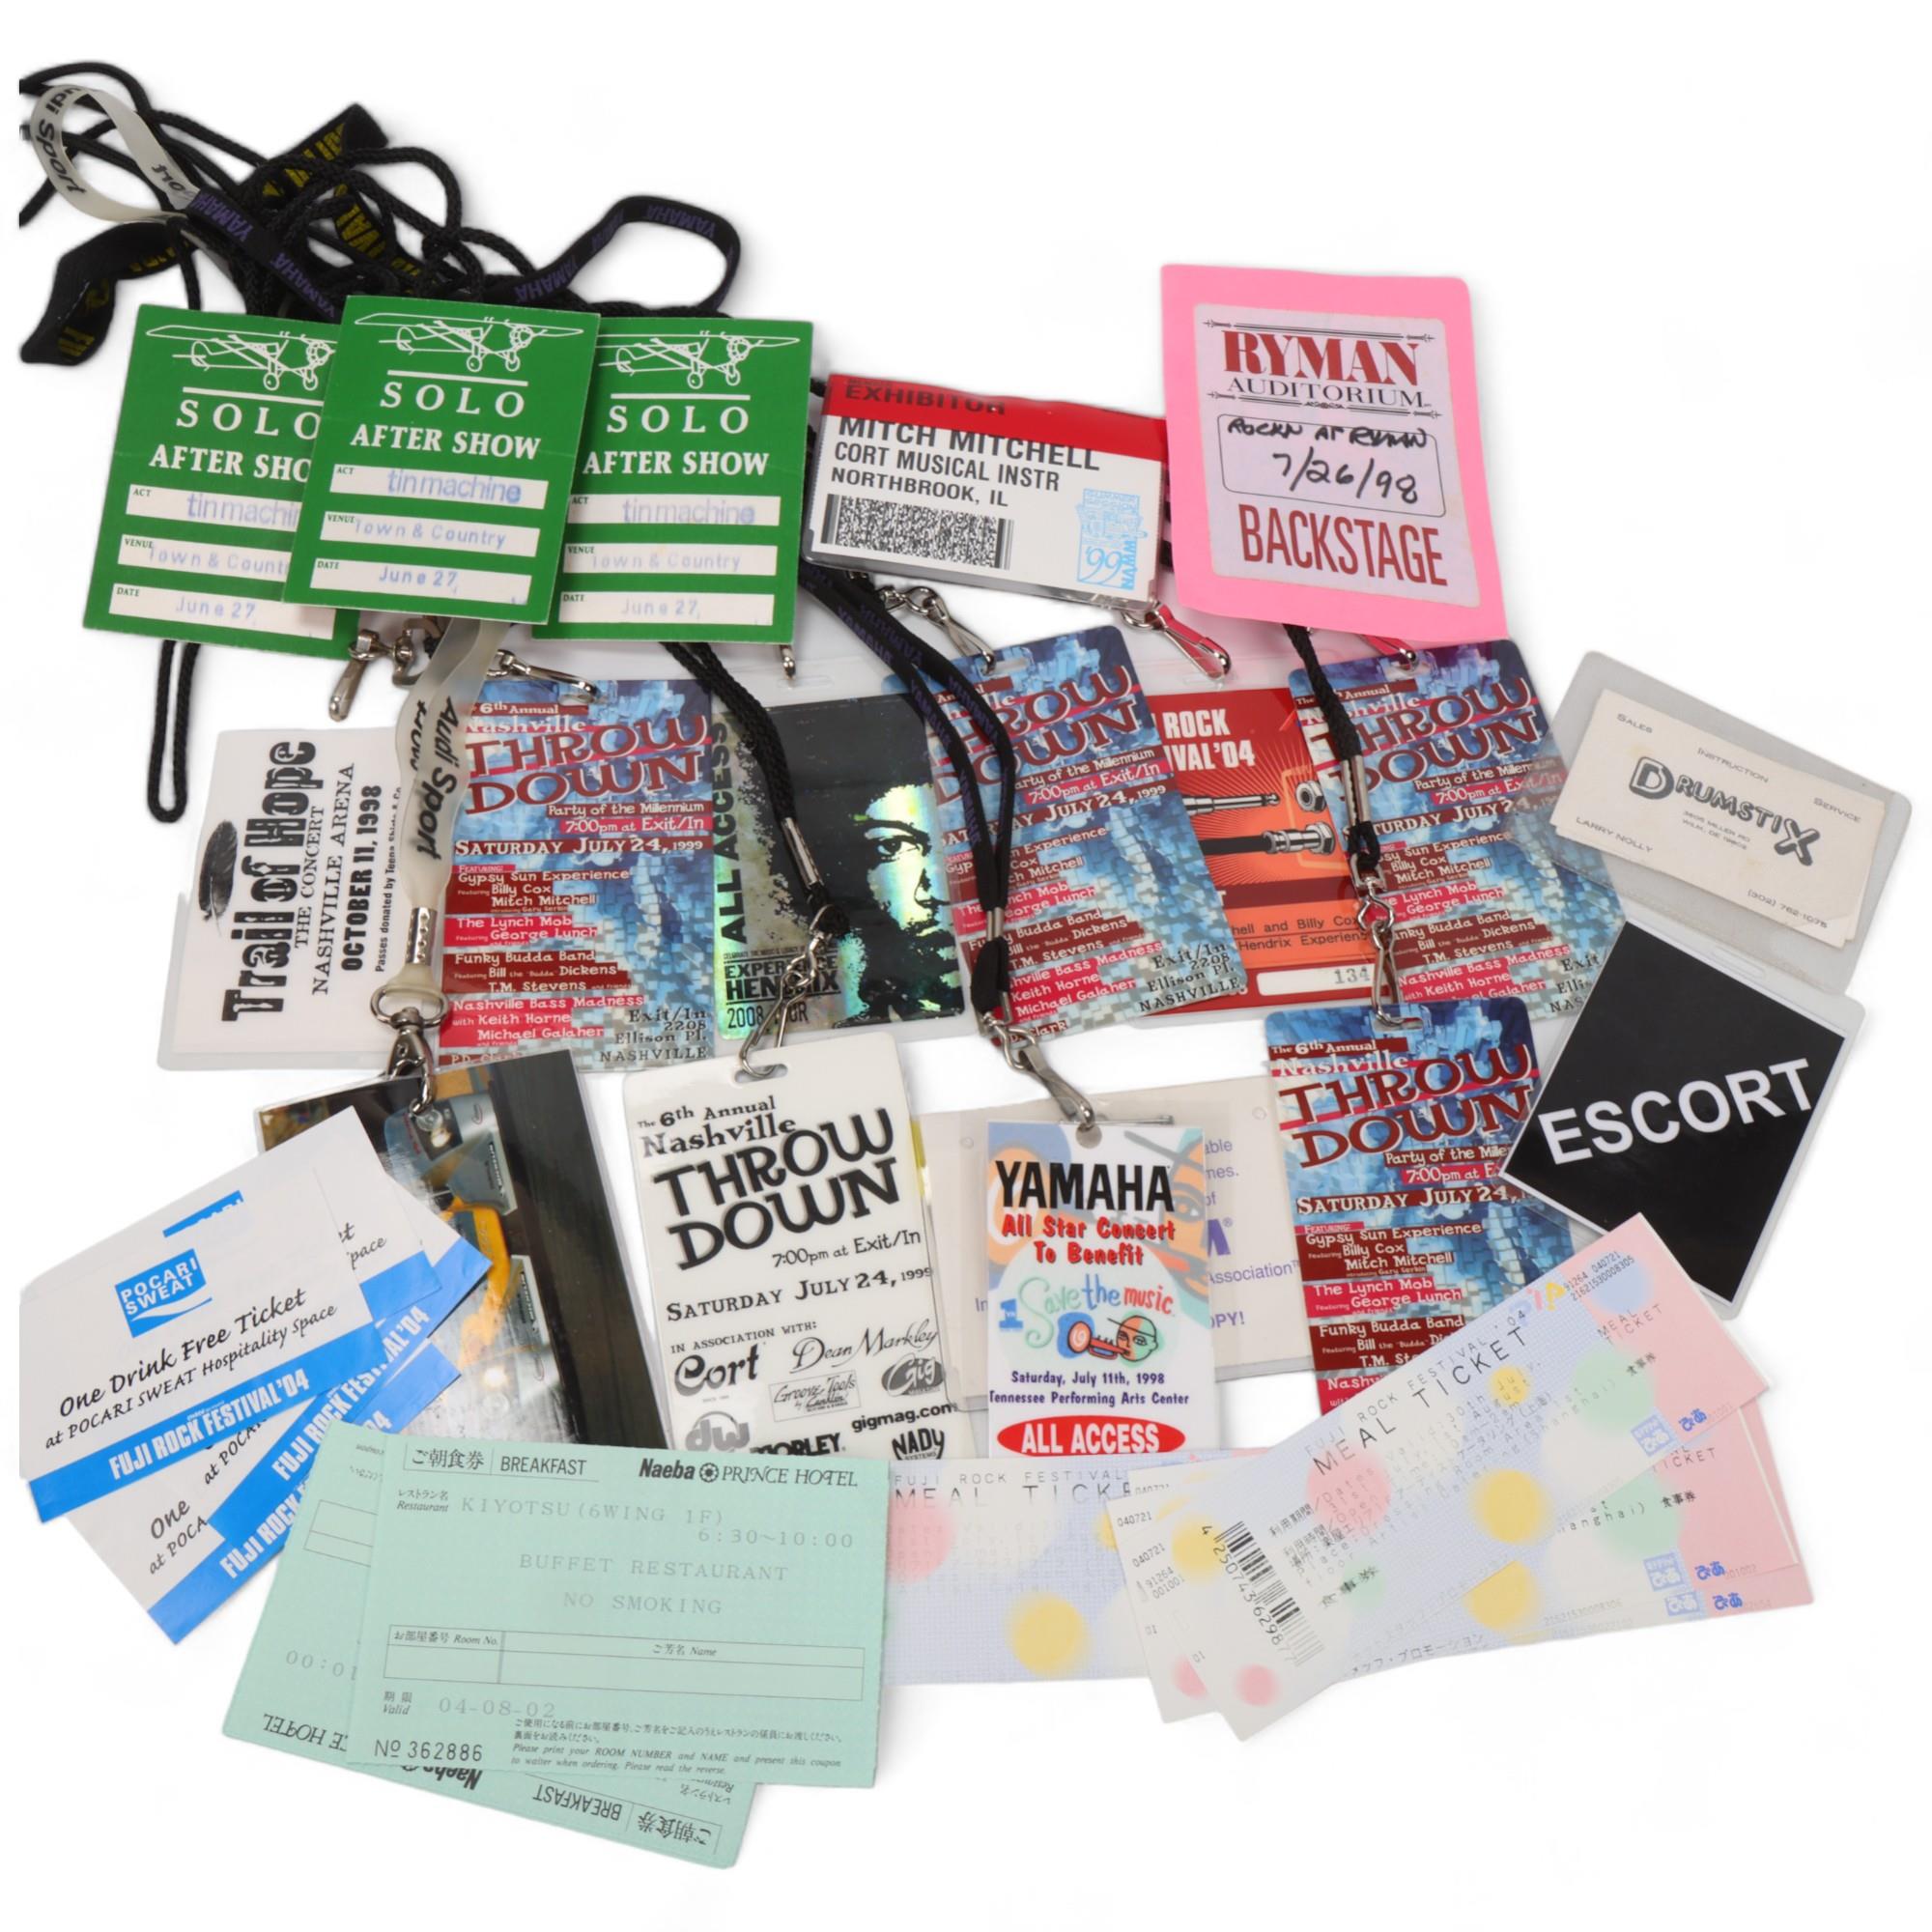 A quantity of modern back stage passes / access all areas / festival passes etc belonging to MITCH